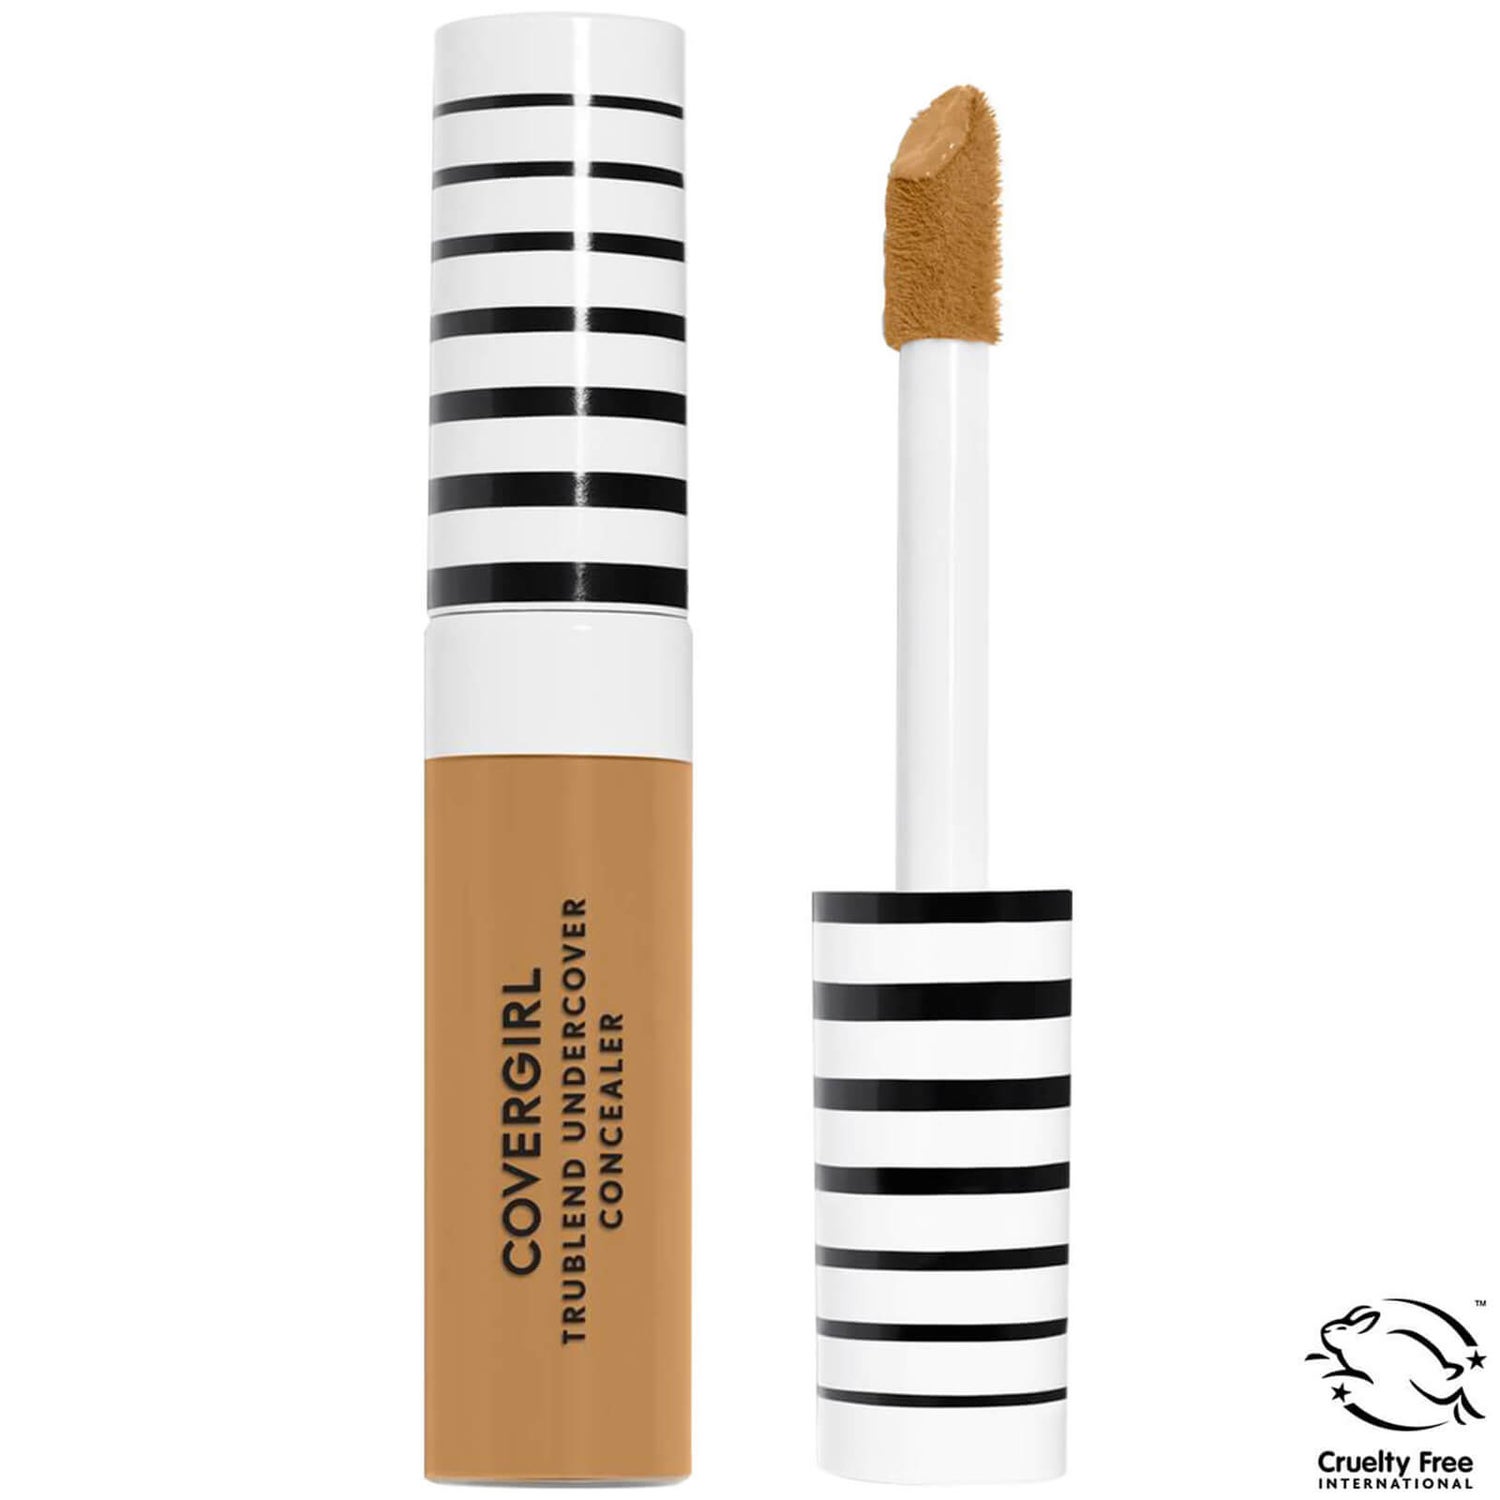 COVERGIRL TruBlend Undercover Concealer 6 oz (Various Shades)